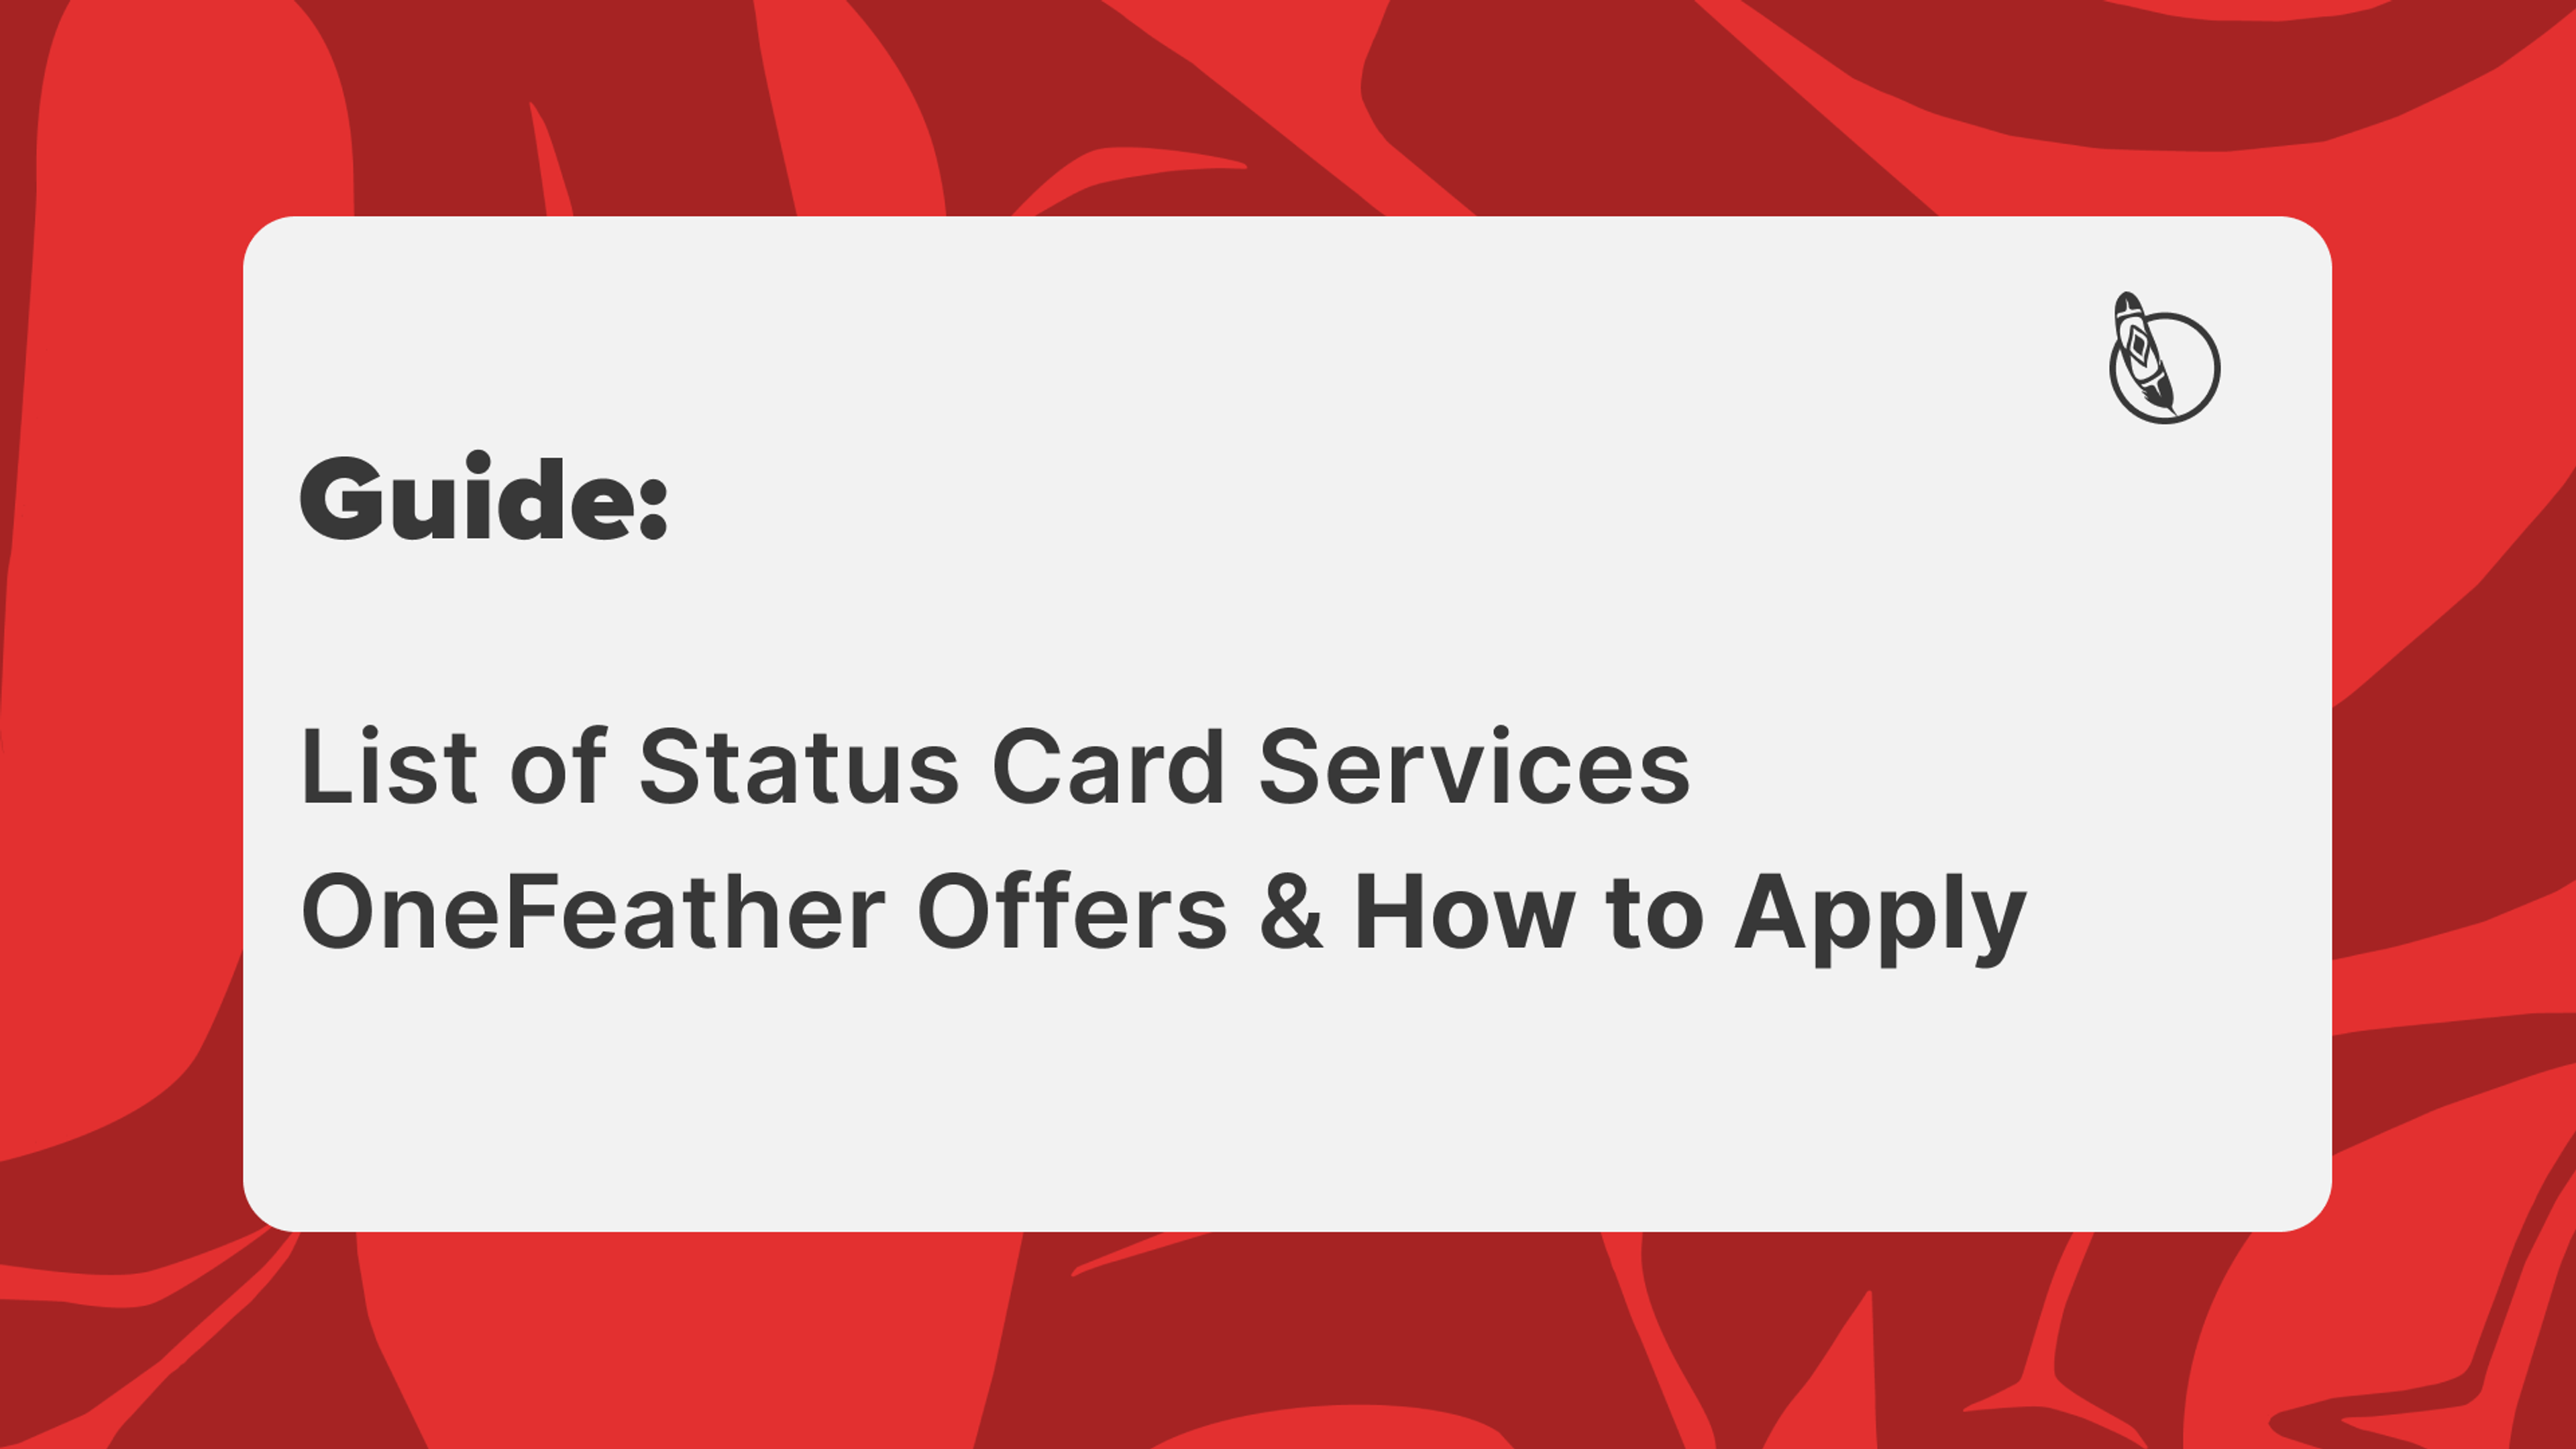 Cover Image for Updated Guide on Everything You Need to Know about Status Cards